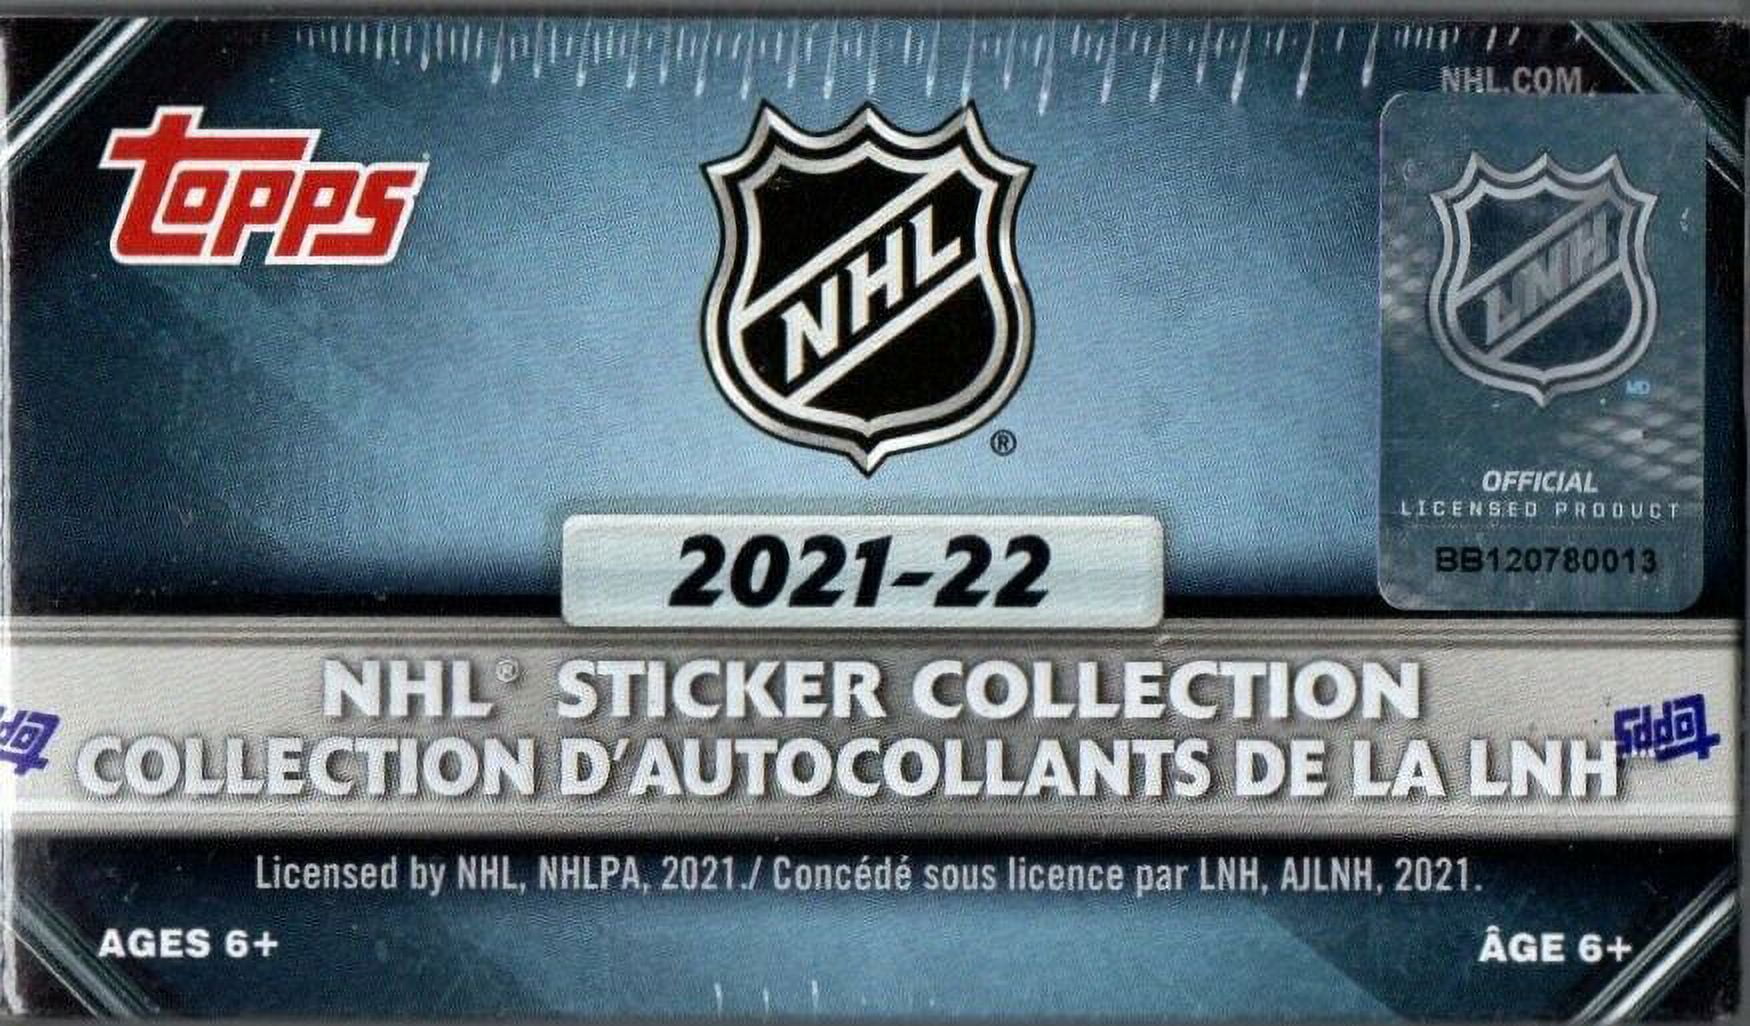 2021-22 Topps NHL Sticker Collection Box